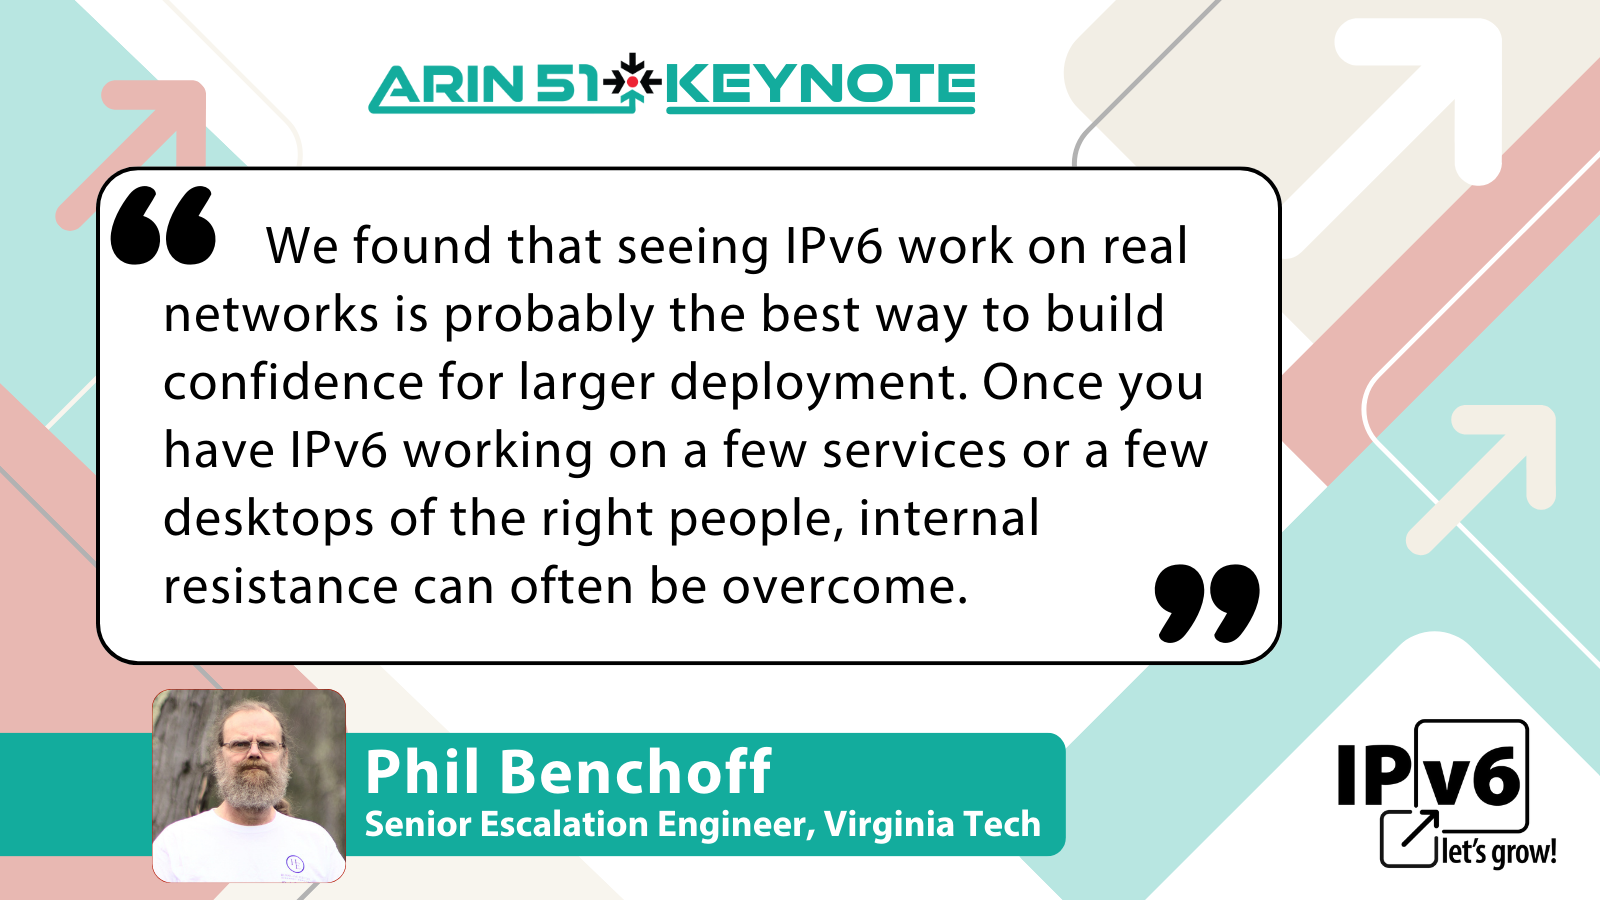 Quote from Phil Benchoff